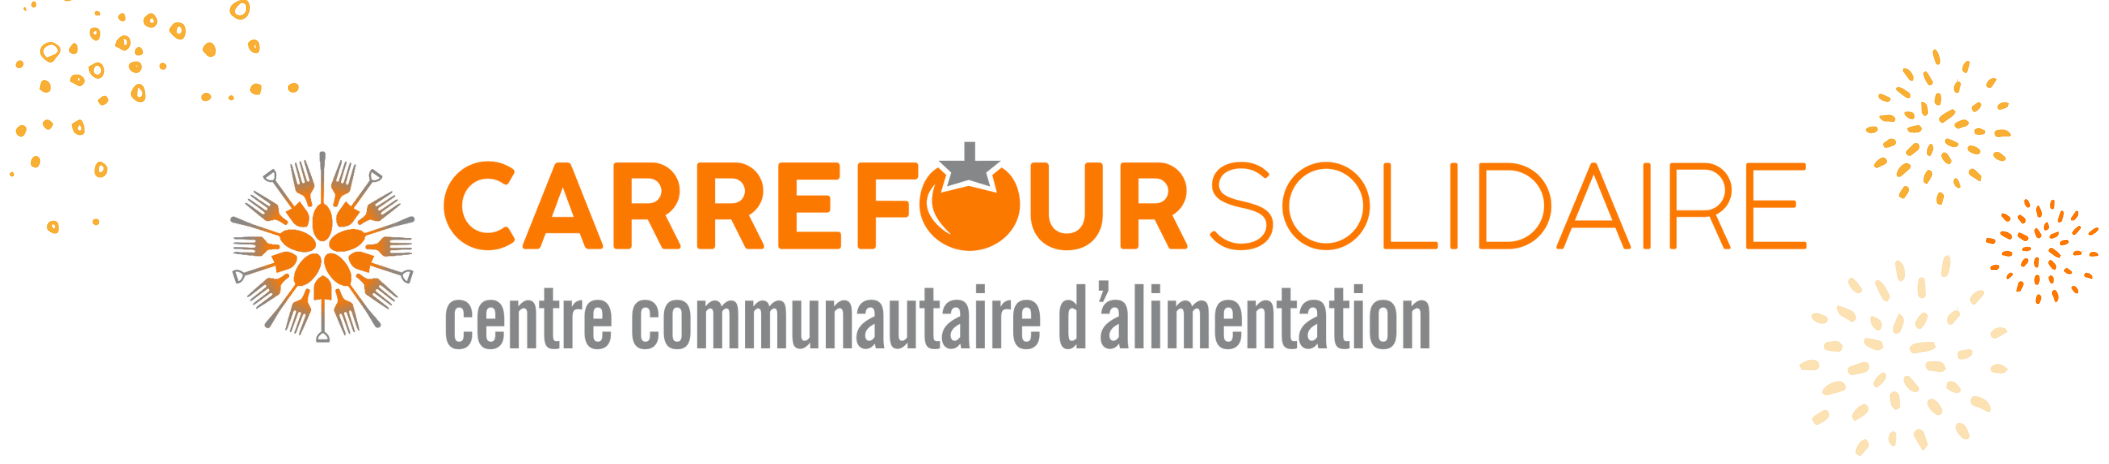 Carrefour Solidaire